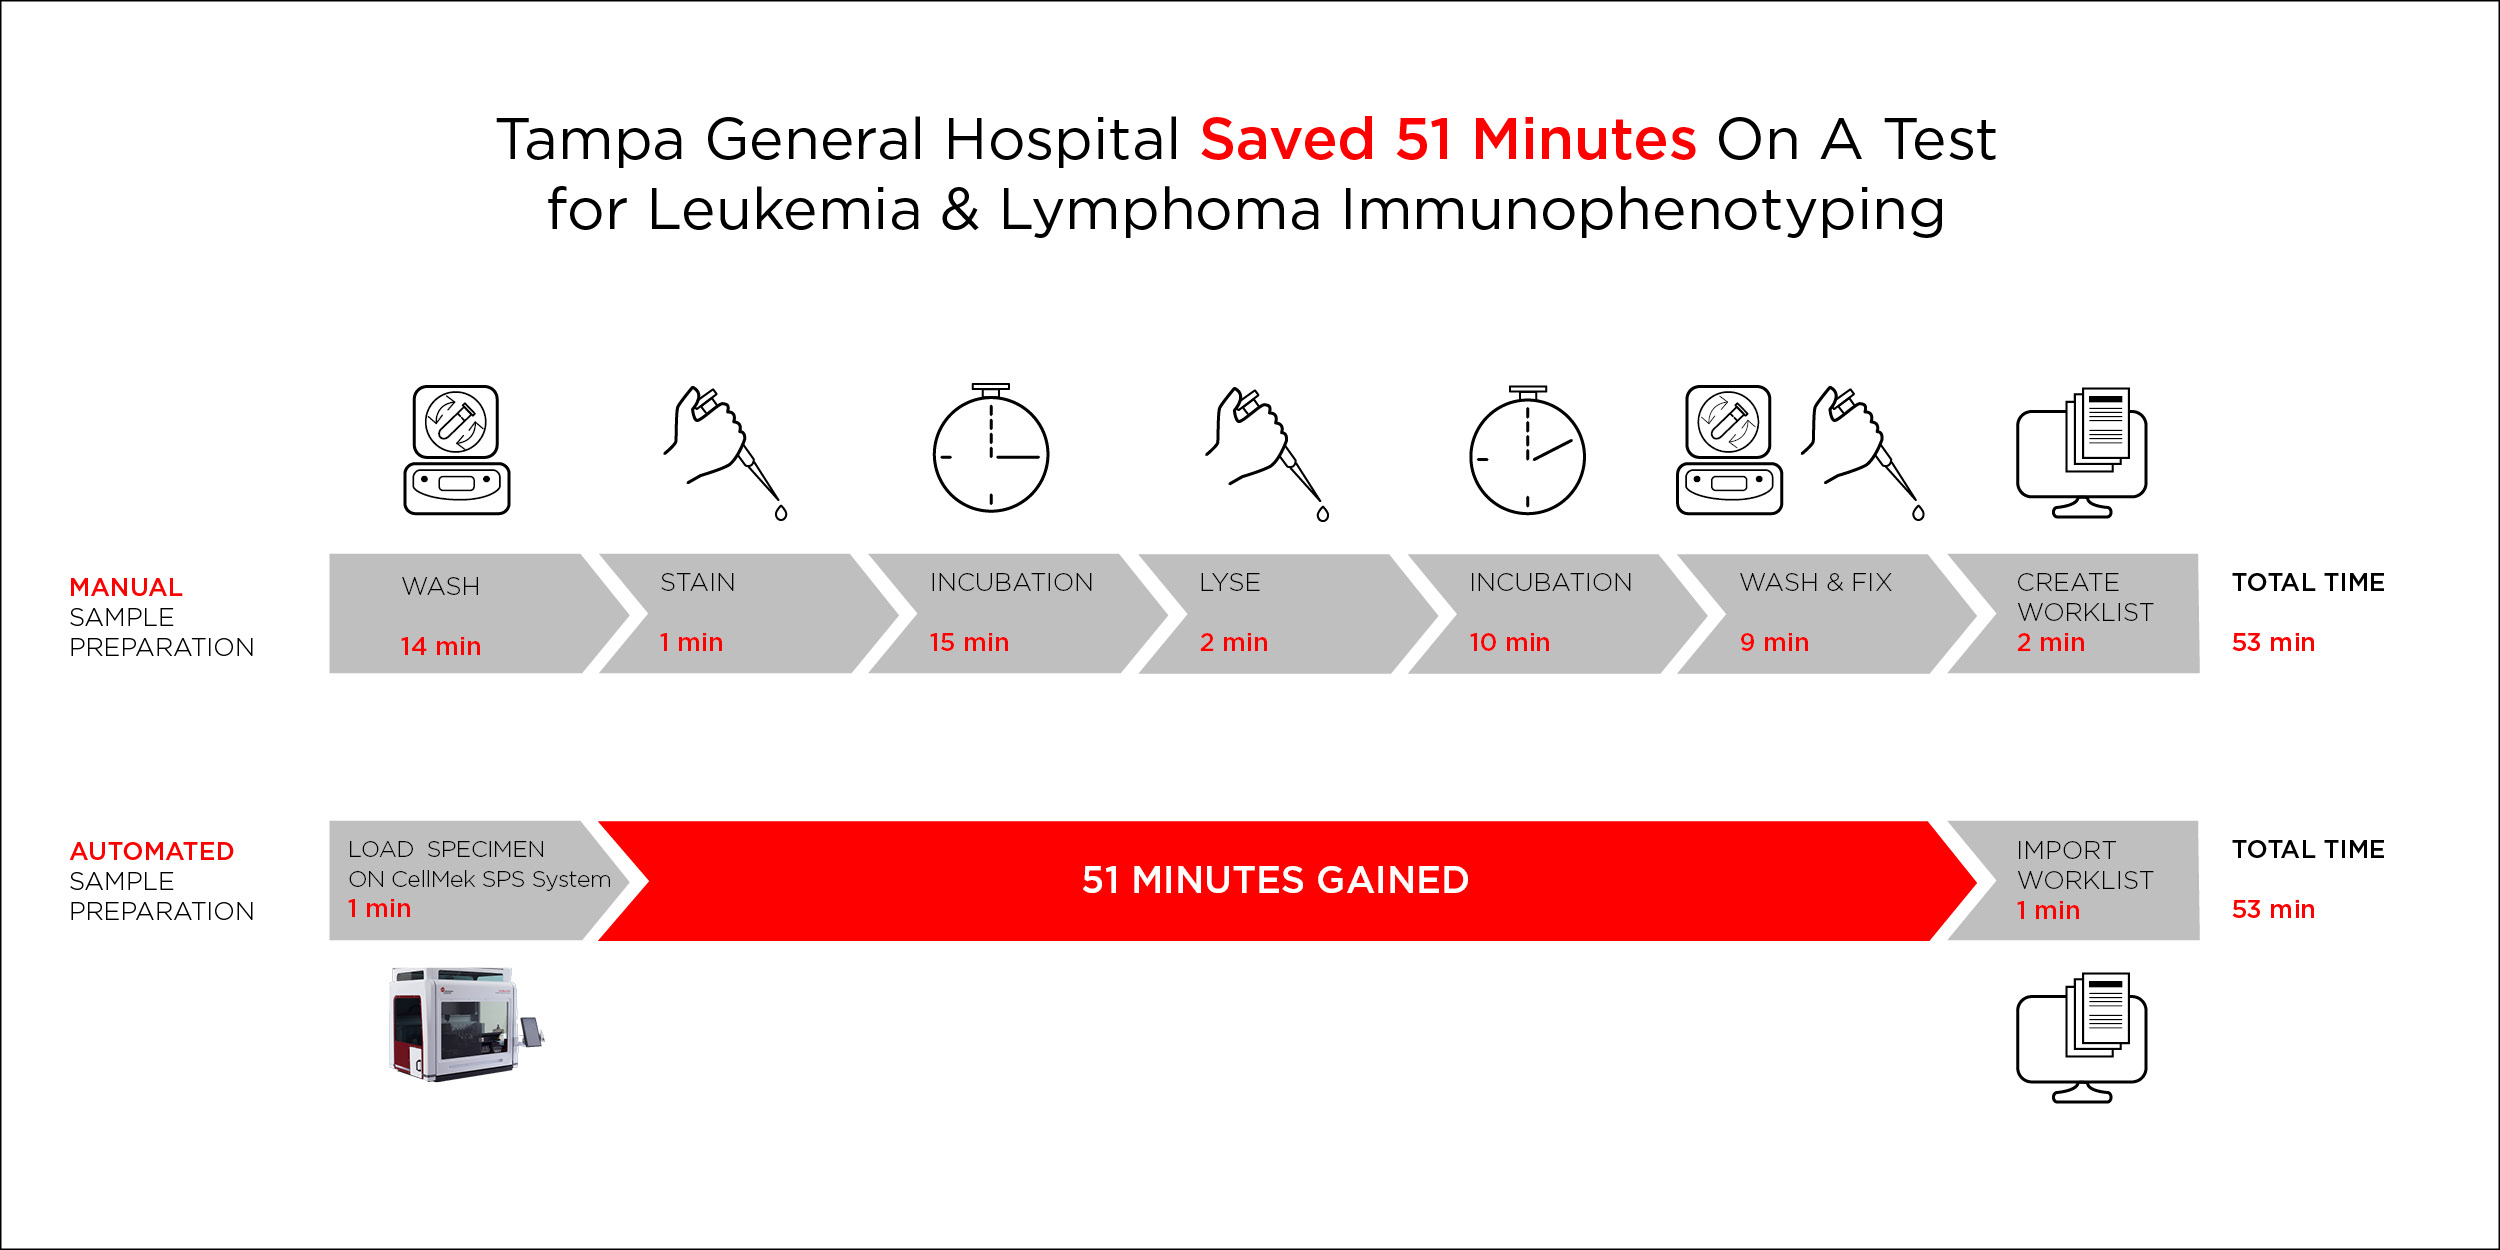 Tampa General Hospital saved 51 minutes on Lab-Developed Test for Leukemia&Lymphoma immunophenotyping